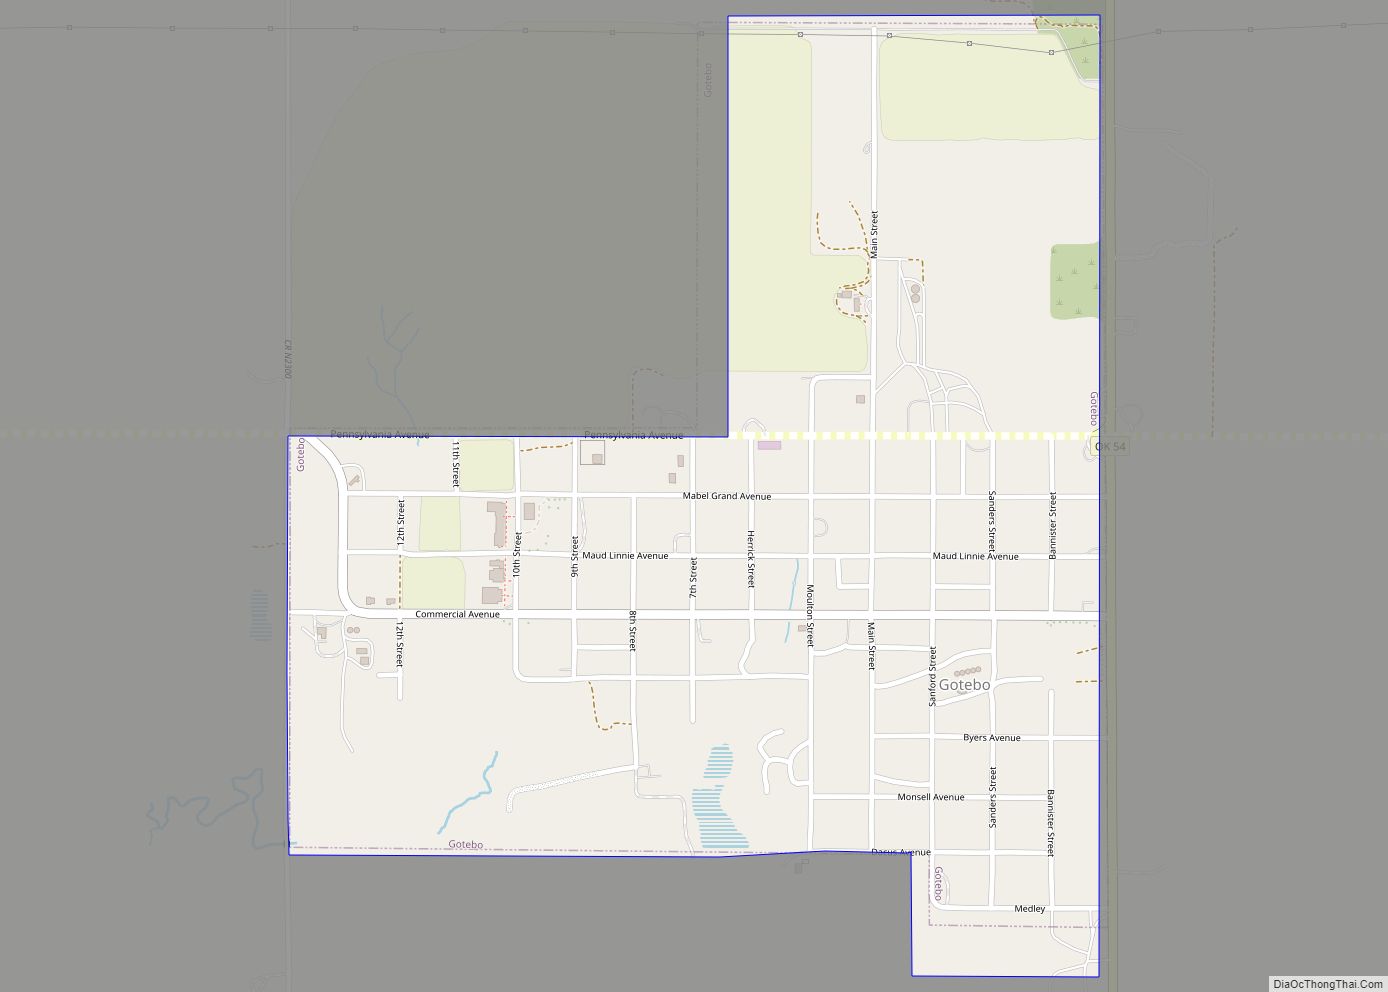 Map of Gotebo town